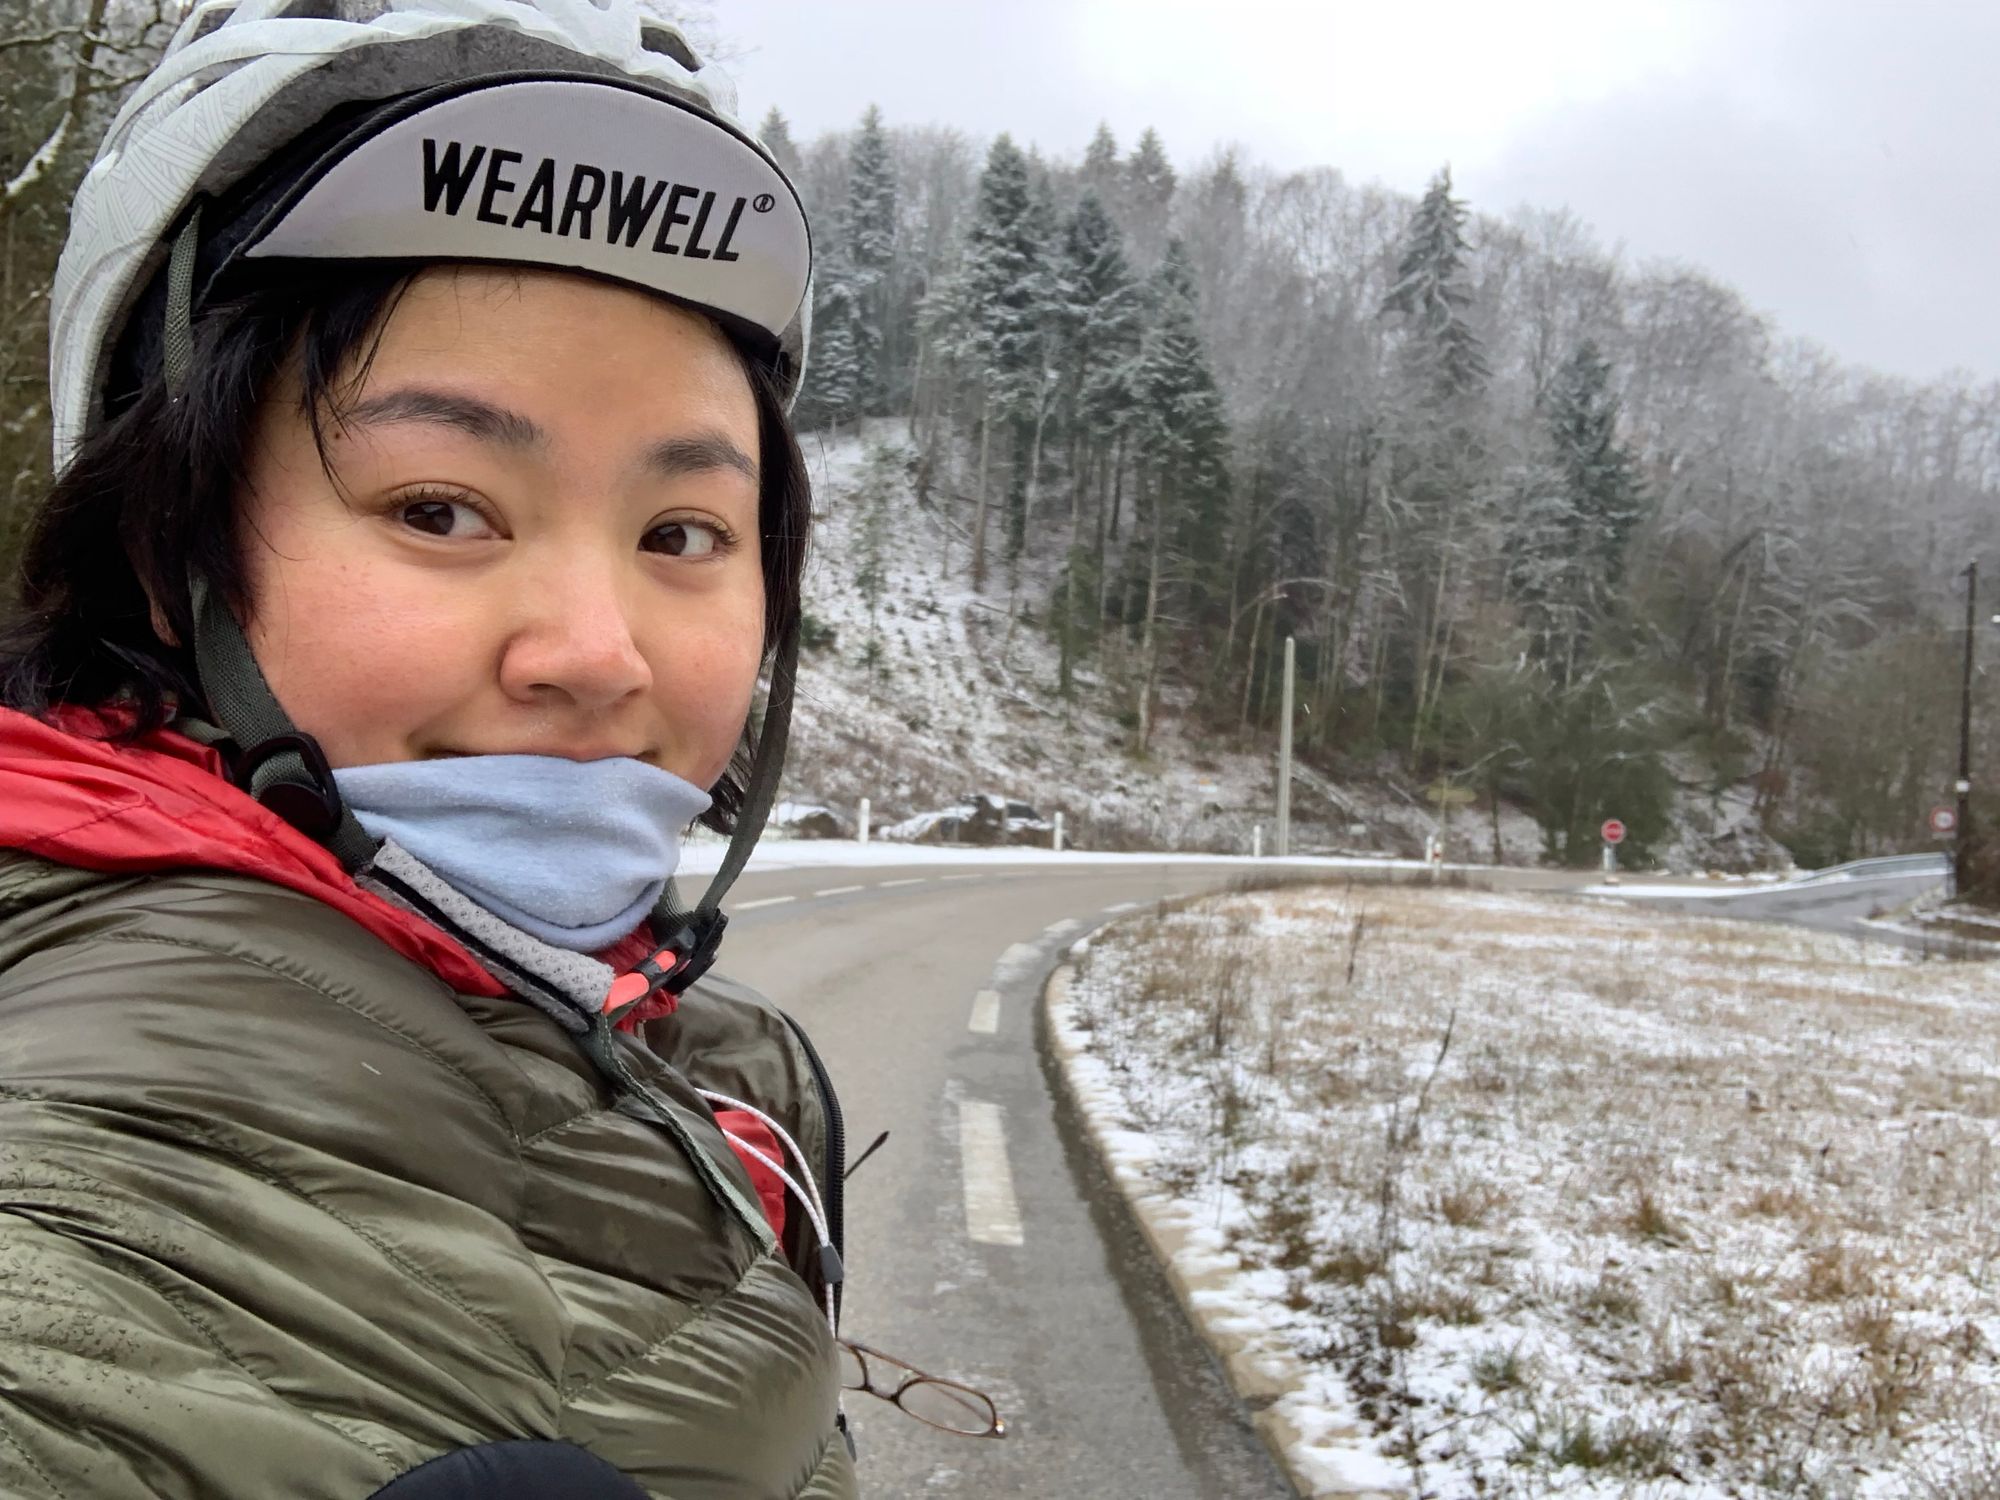 Chaewon Yoo shares how she cycled from Seoul to London on a bike